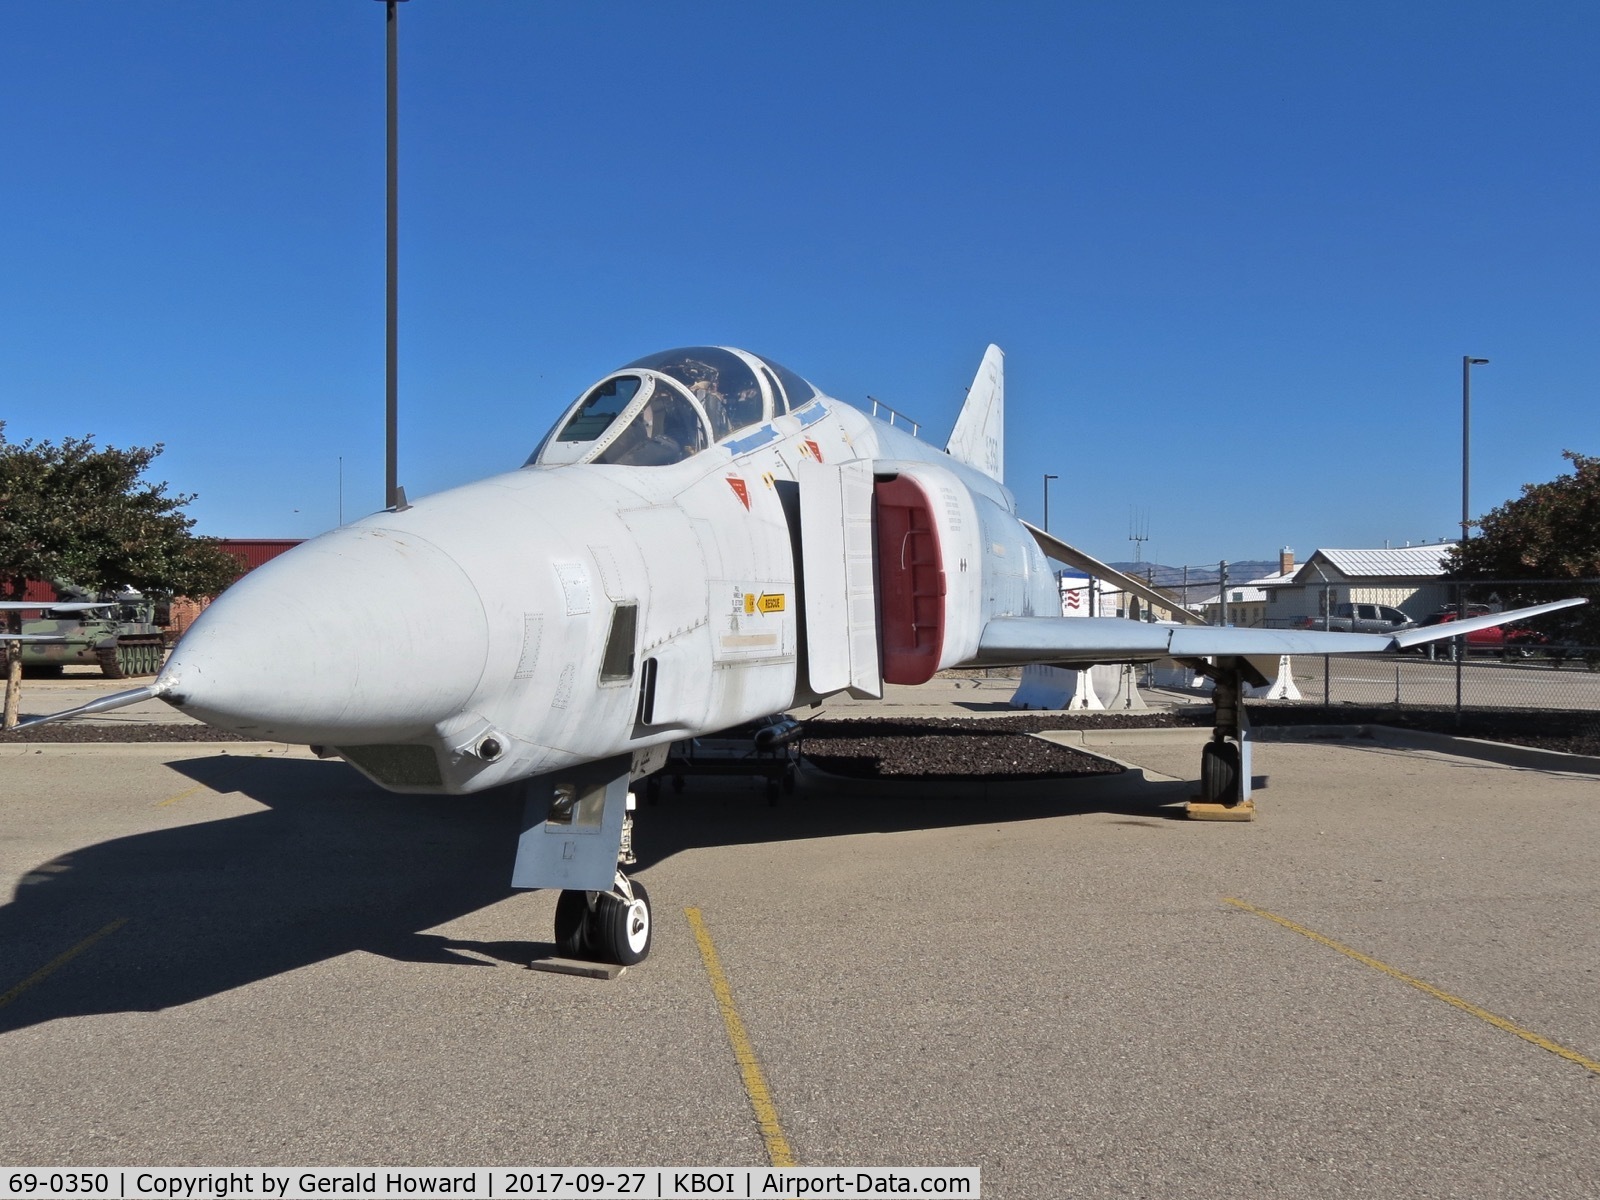 69-0350, 1969 McDonnell Douglas RF-4C Phantom II C/N 3688, On display at the Gowen Military Museum on the SW side of KBOI. Flown by the 124 Fighter Wing, Idaho ANG.